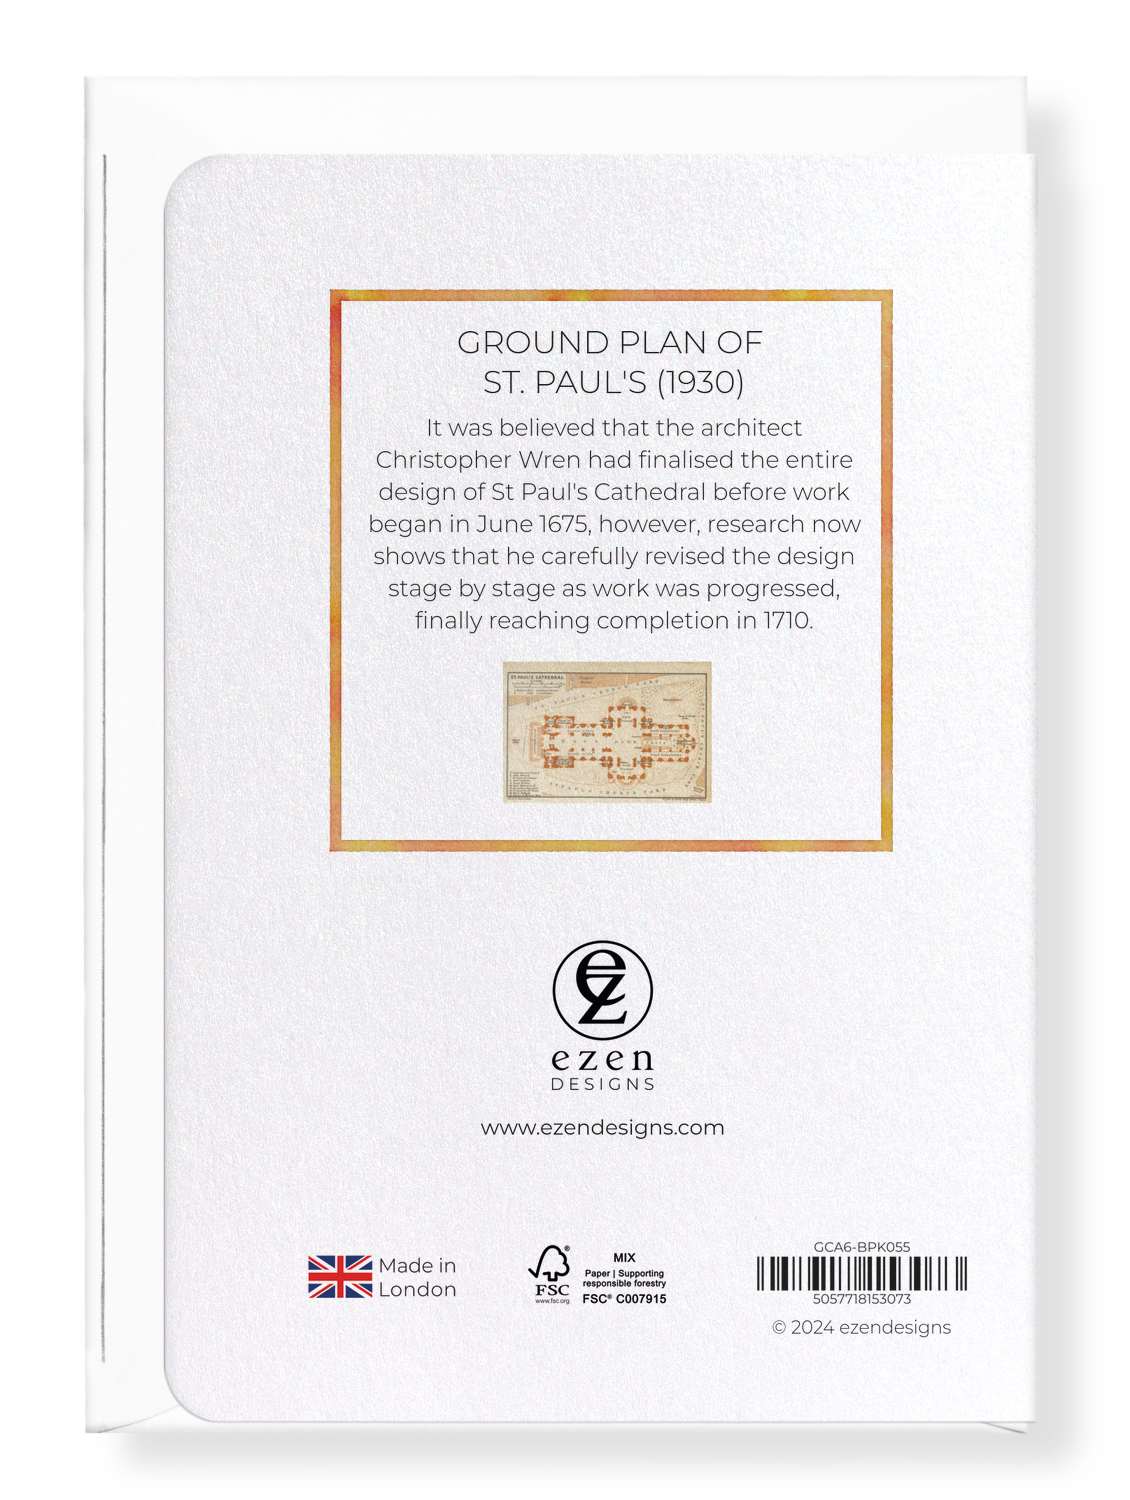 Ezen Designs - Ground plan of St. Paul's (1930) - Greeting Card - Back